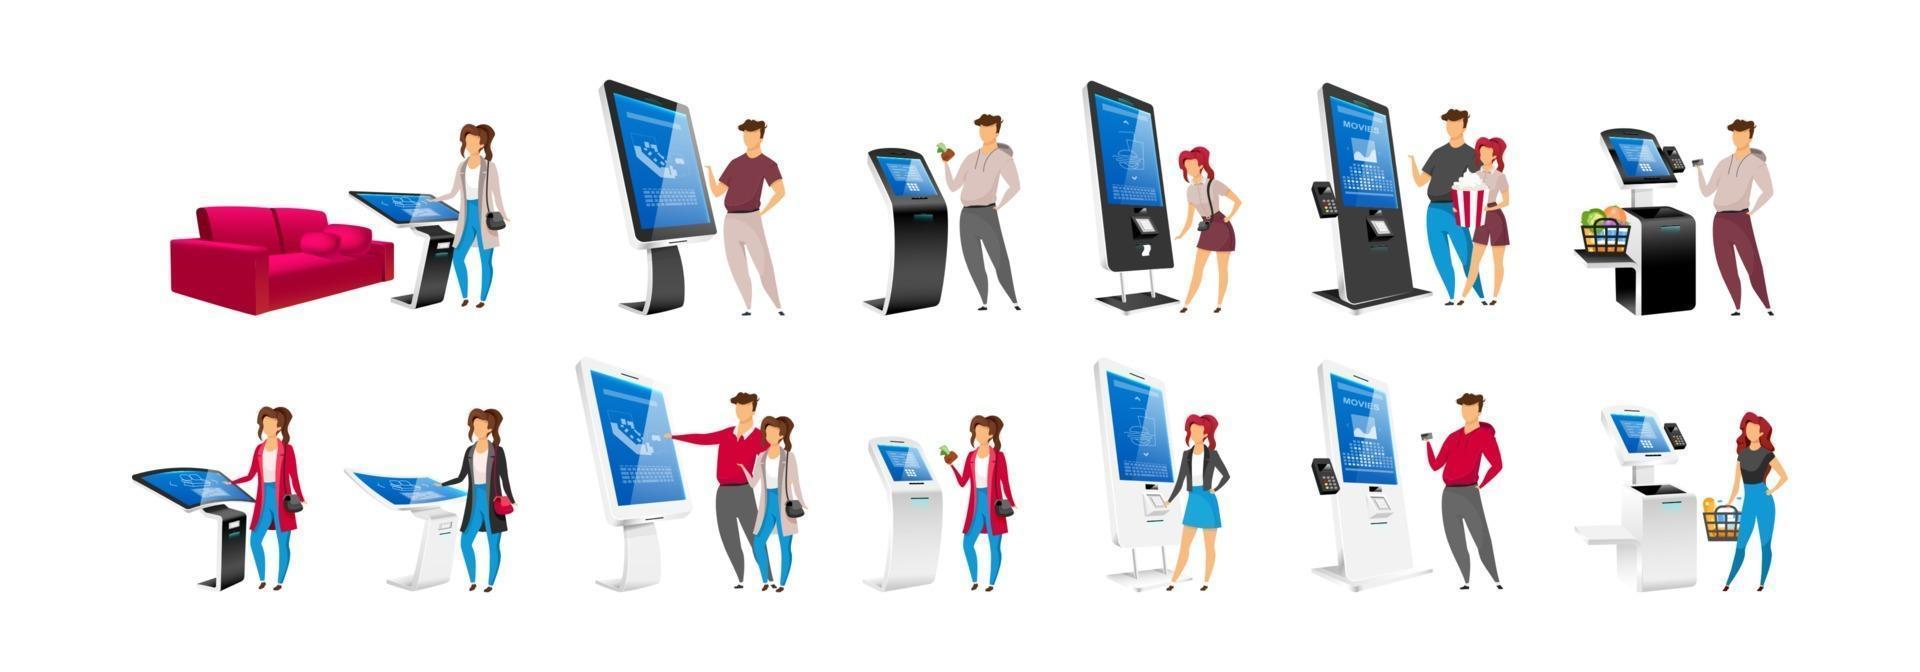 People using self order kiosks flat color vector faceless characters set. Interactive machine users isolated cartoon illustrations on white background. Electronic eqipment and touchscreen counters